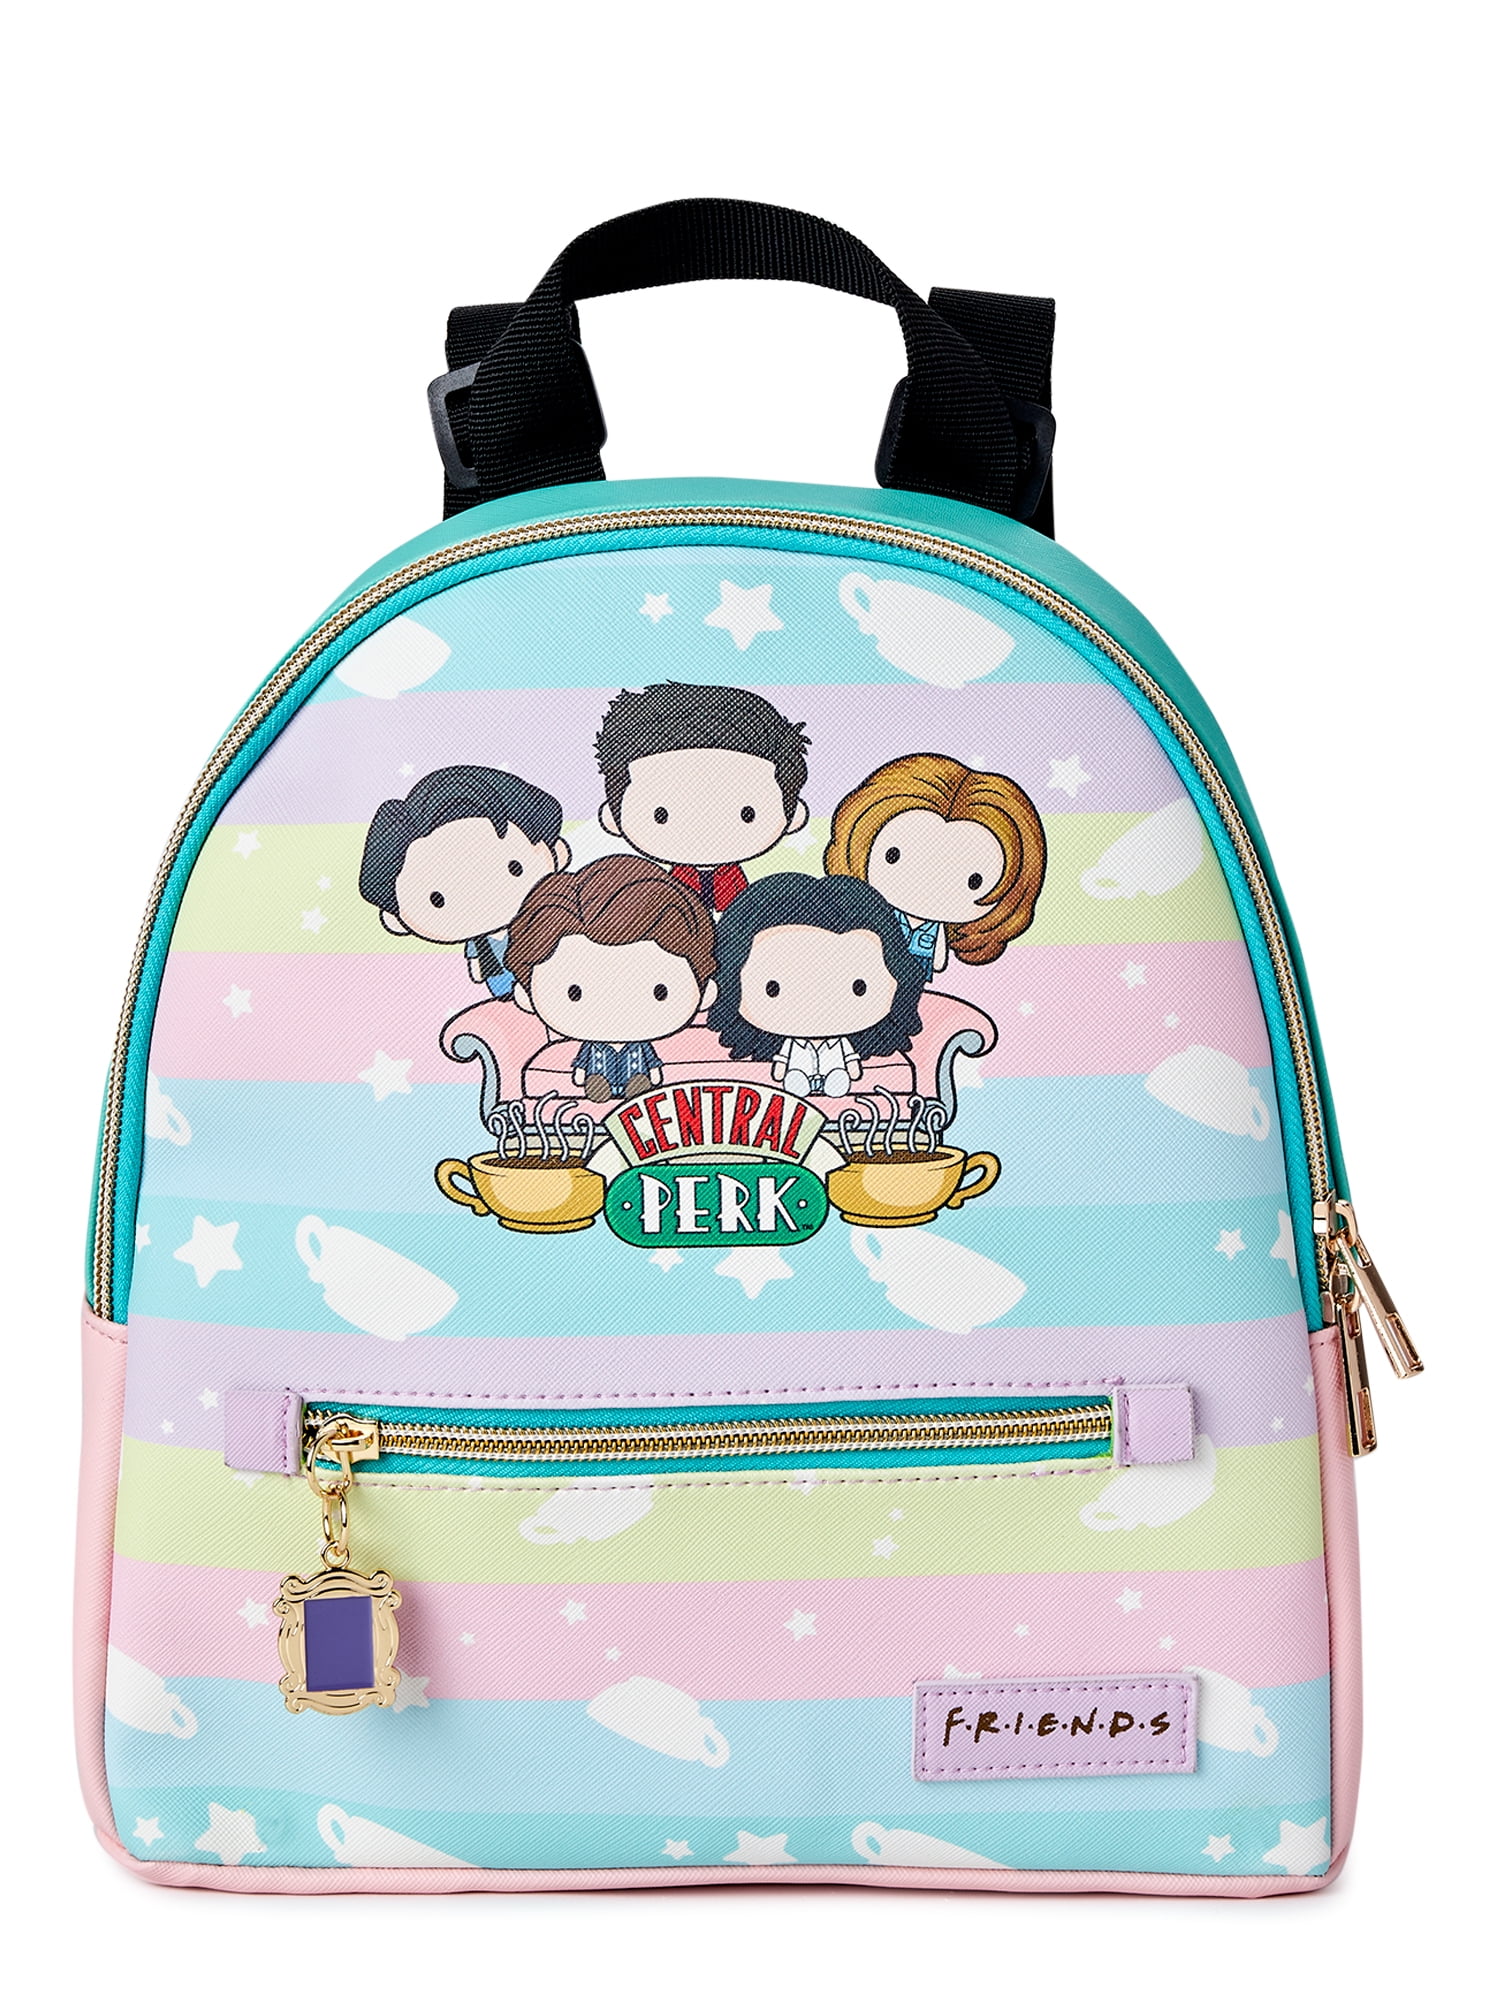 Rainbow Friends Backpack Kids Customized Backpack All 